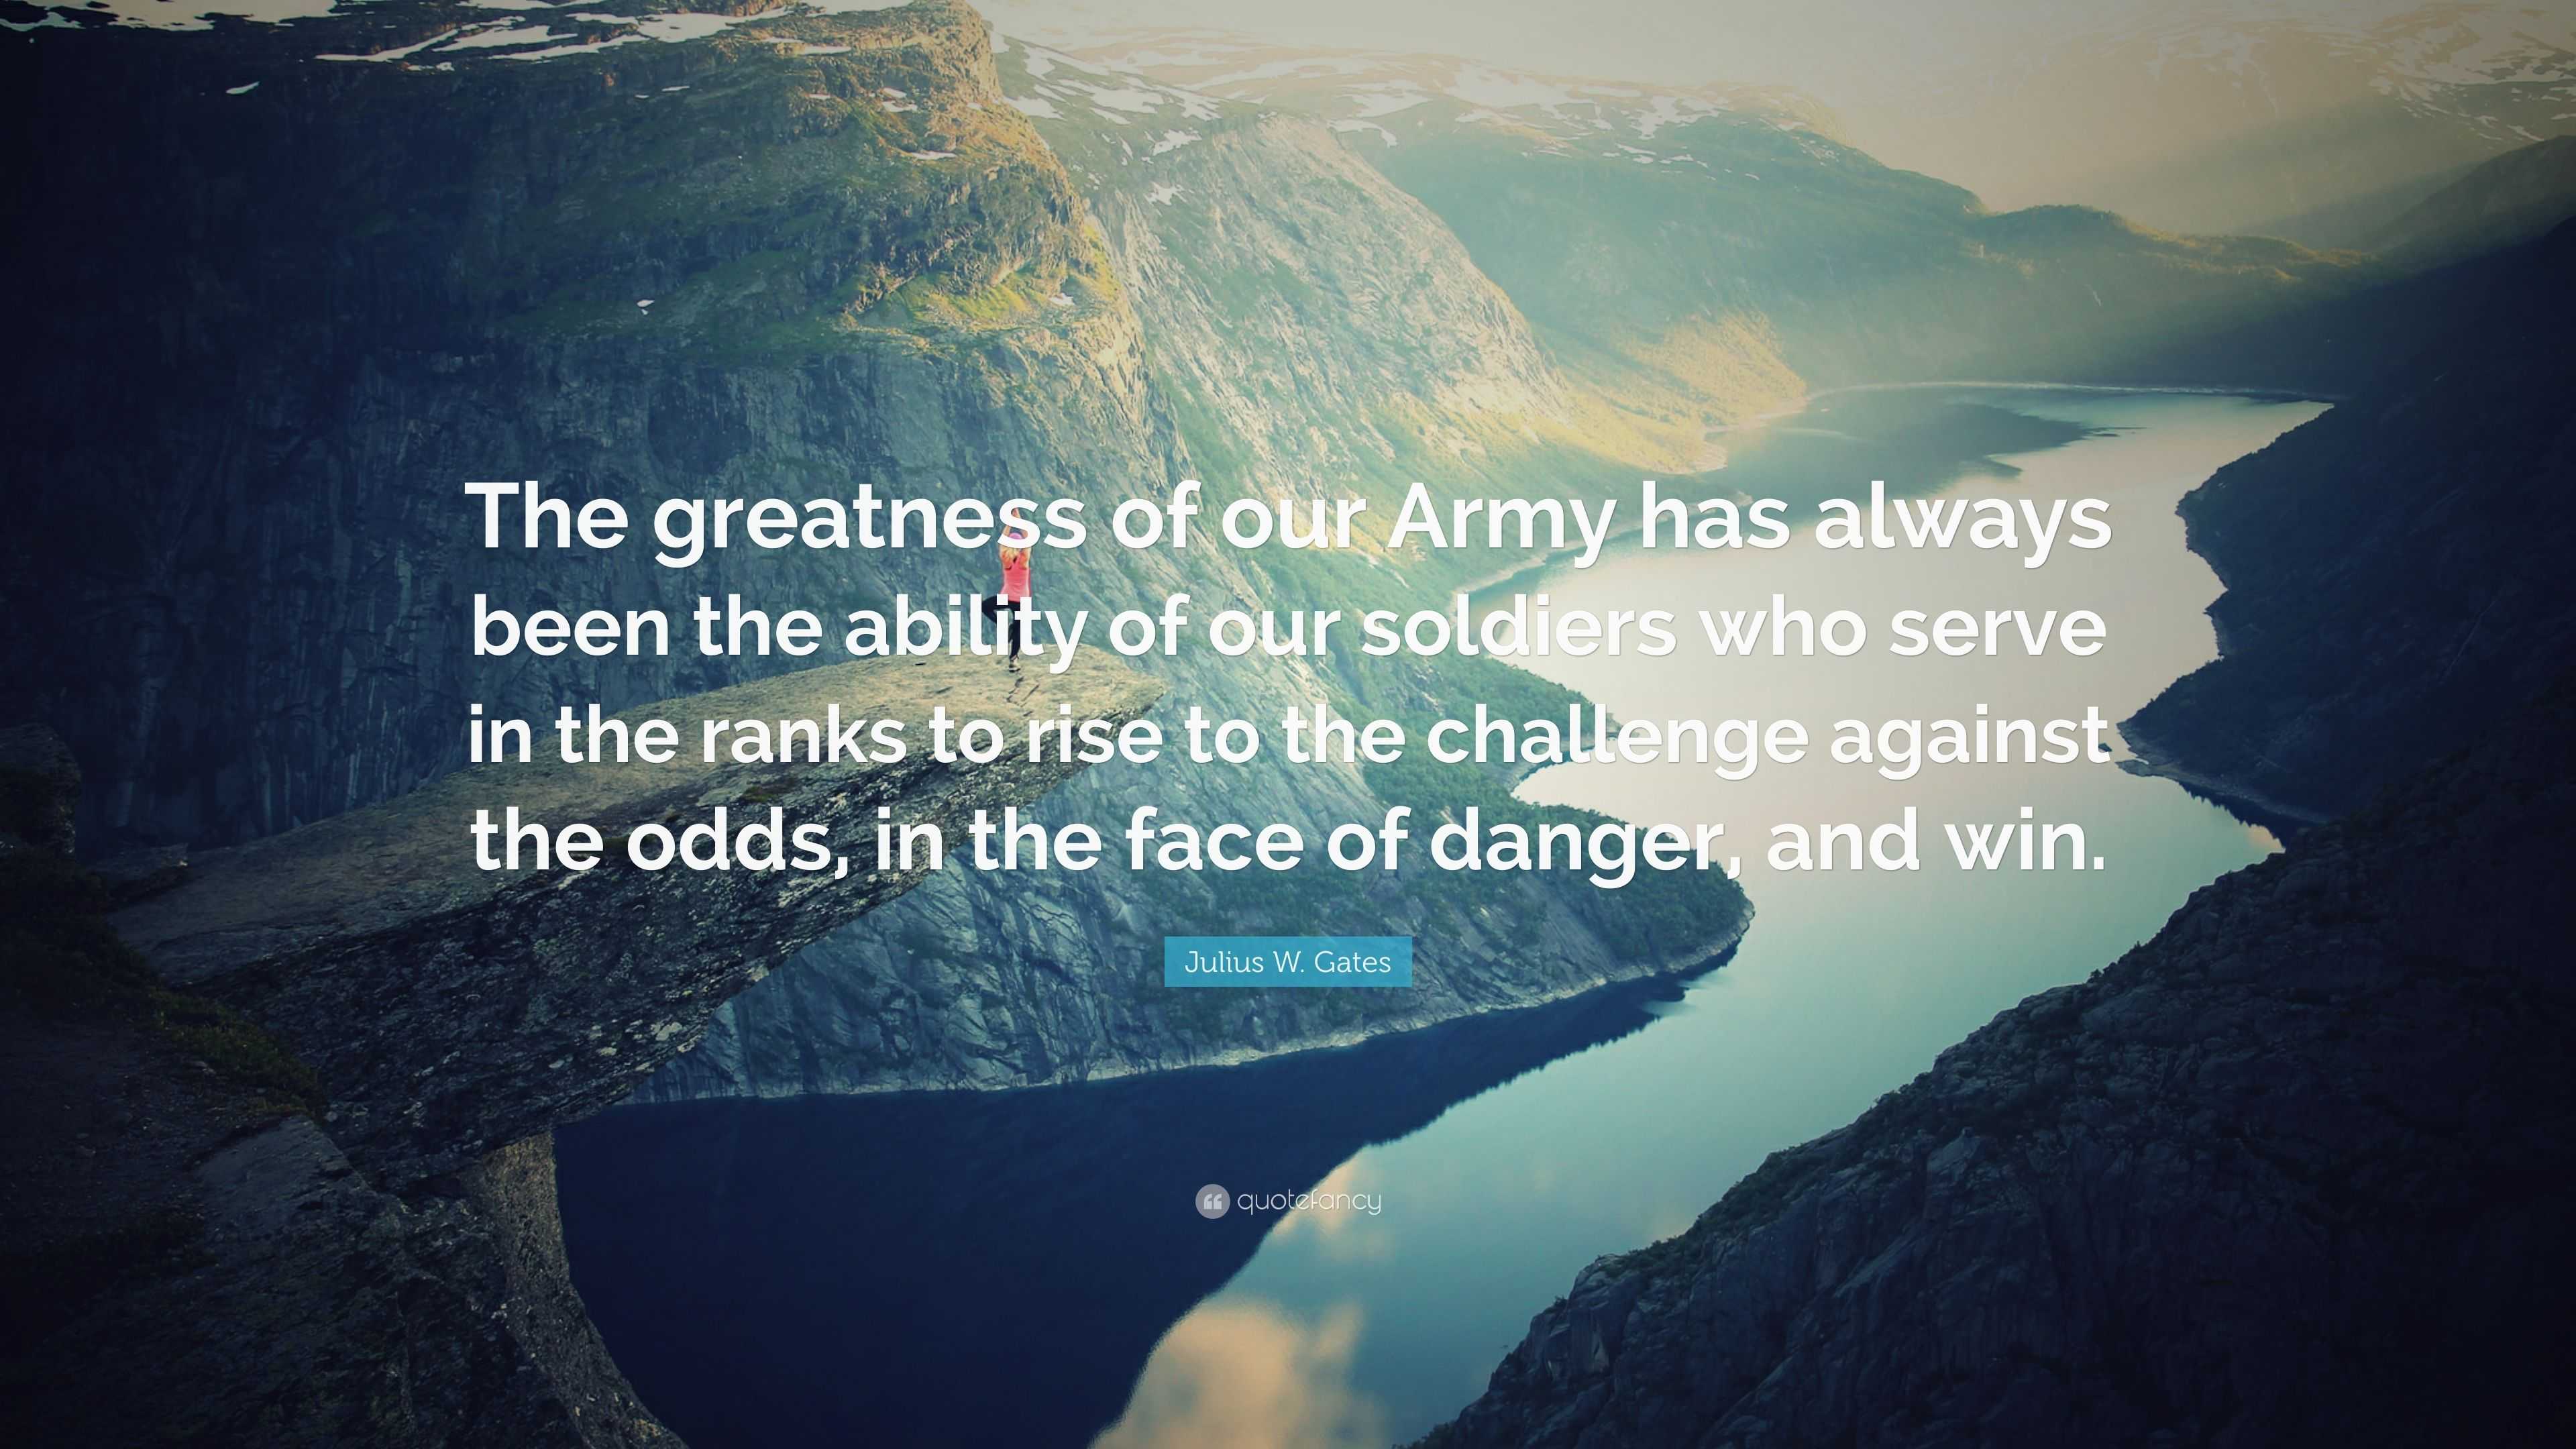 Julius W. Gates Quote: “The greatness of our Army has always been the ...